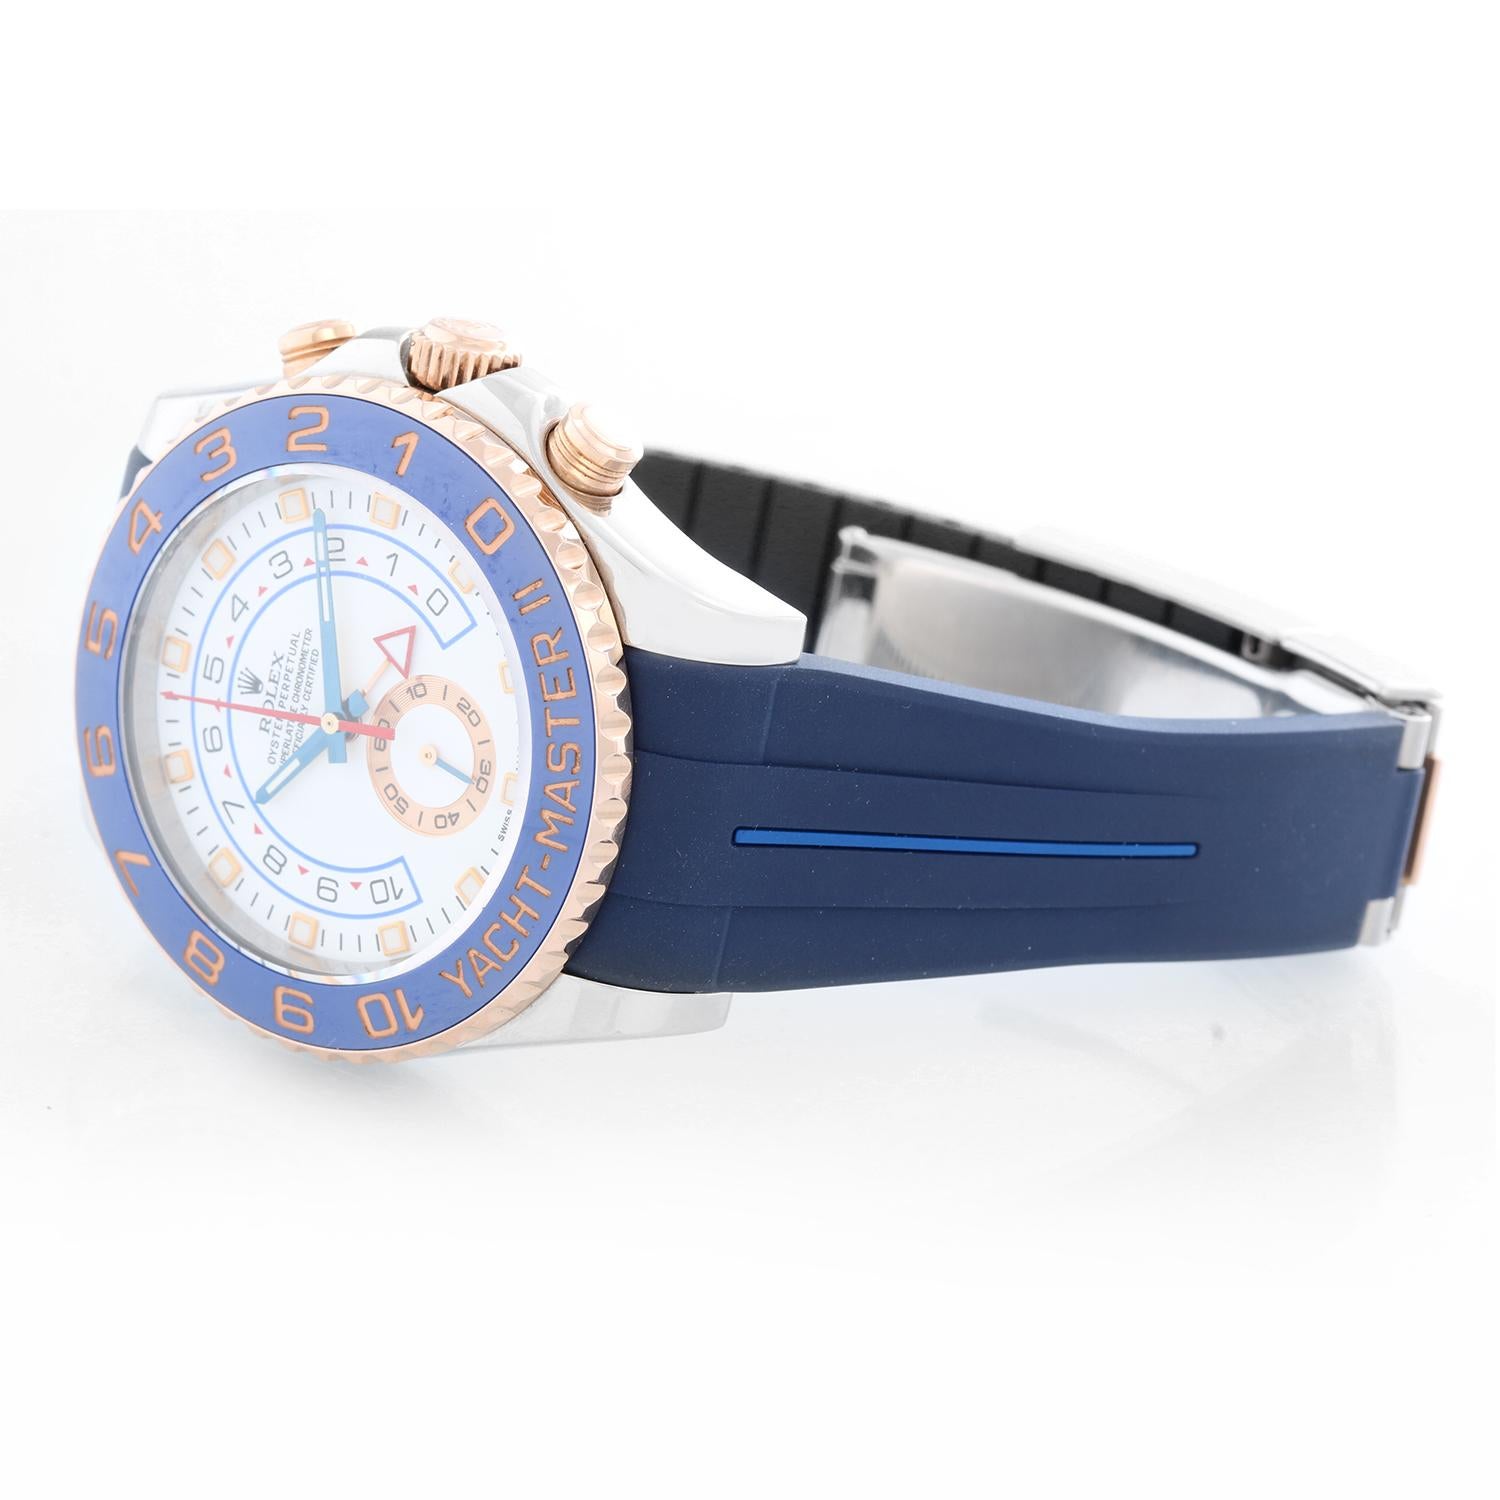 Men's Rolex Yacht-Master II Regatta  Rose Gold Watch 116681 - Automatic winding, Regatta Chronograph, 31 jewels, sapphire crystal. Stainless steel case with rose gold bezel with blue insert (44mm diameter). White dial with luminous markers; gold